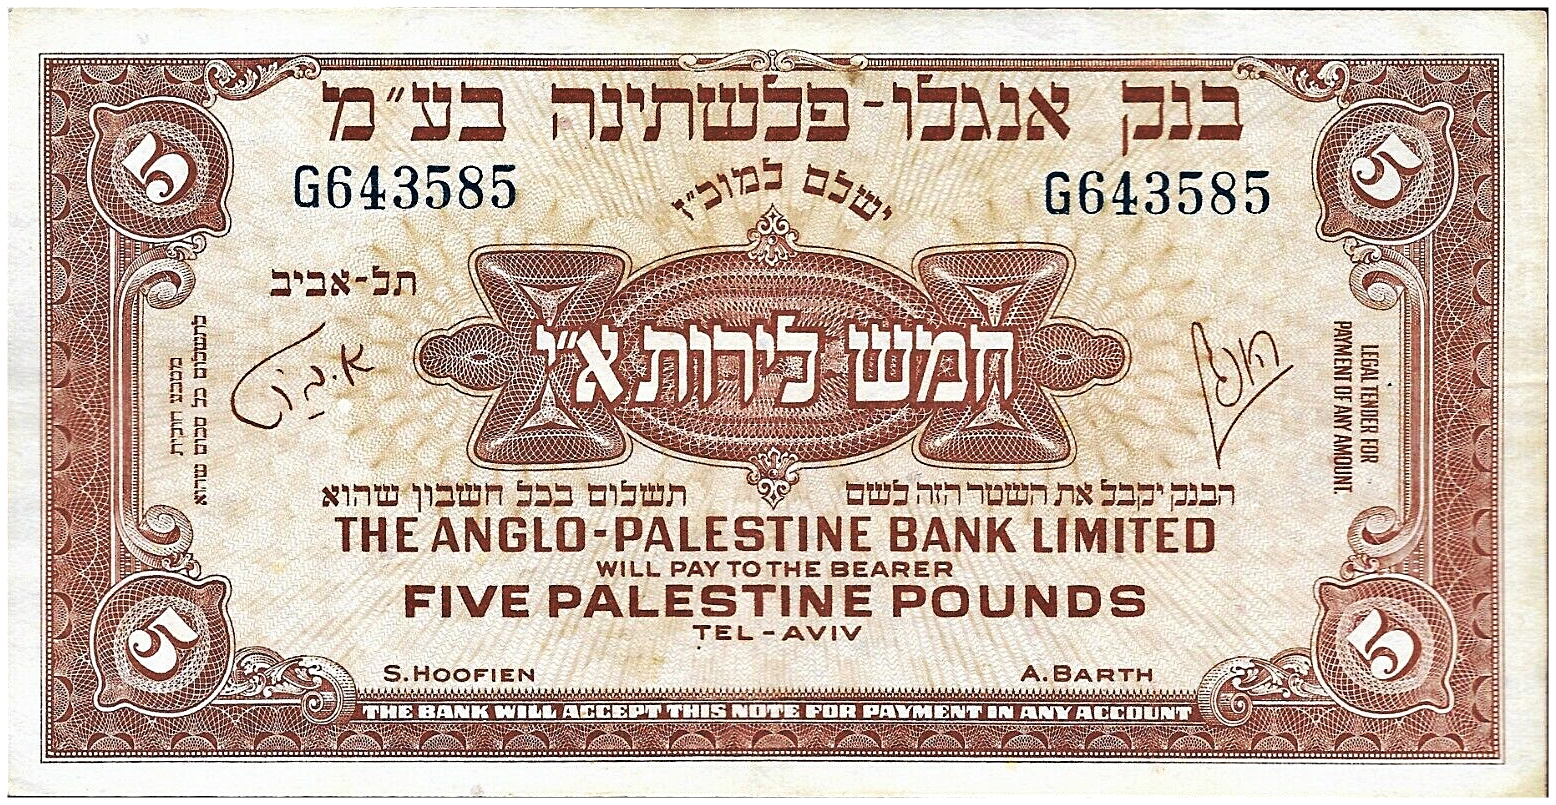 Issuer Israel Issuing bank Anglo-Palestine Bank Limited Period State of Israel (1948-date) Type Standard banknote Years 1948-1952 Value 5 Palestine Pounds Currency Palestine Pound (1948-1949) Composition Paper Size 105 × 68 mm Shape Rectangular Demonetized 23 June 1952 Number N# 207999 References P# 16